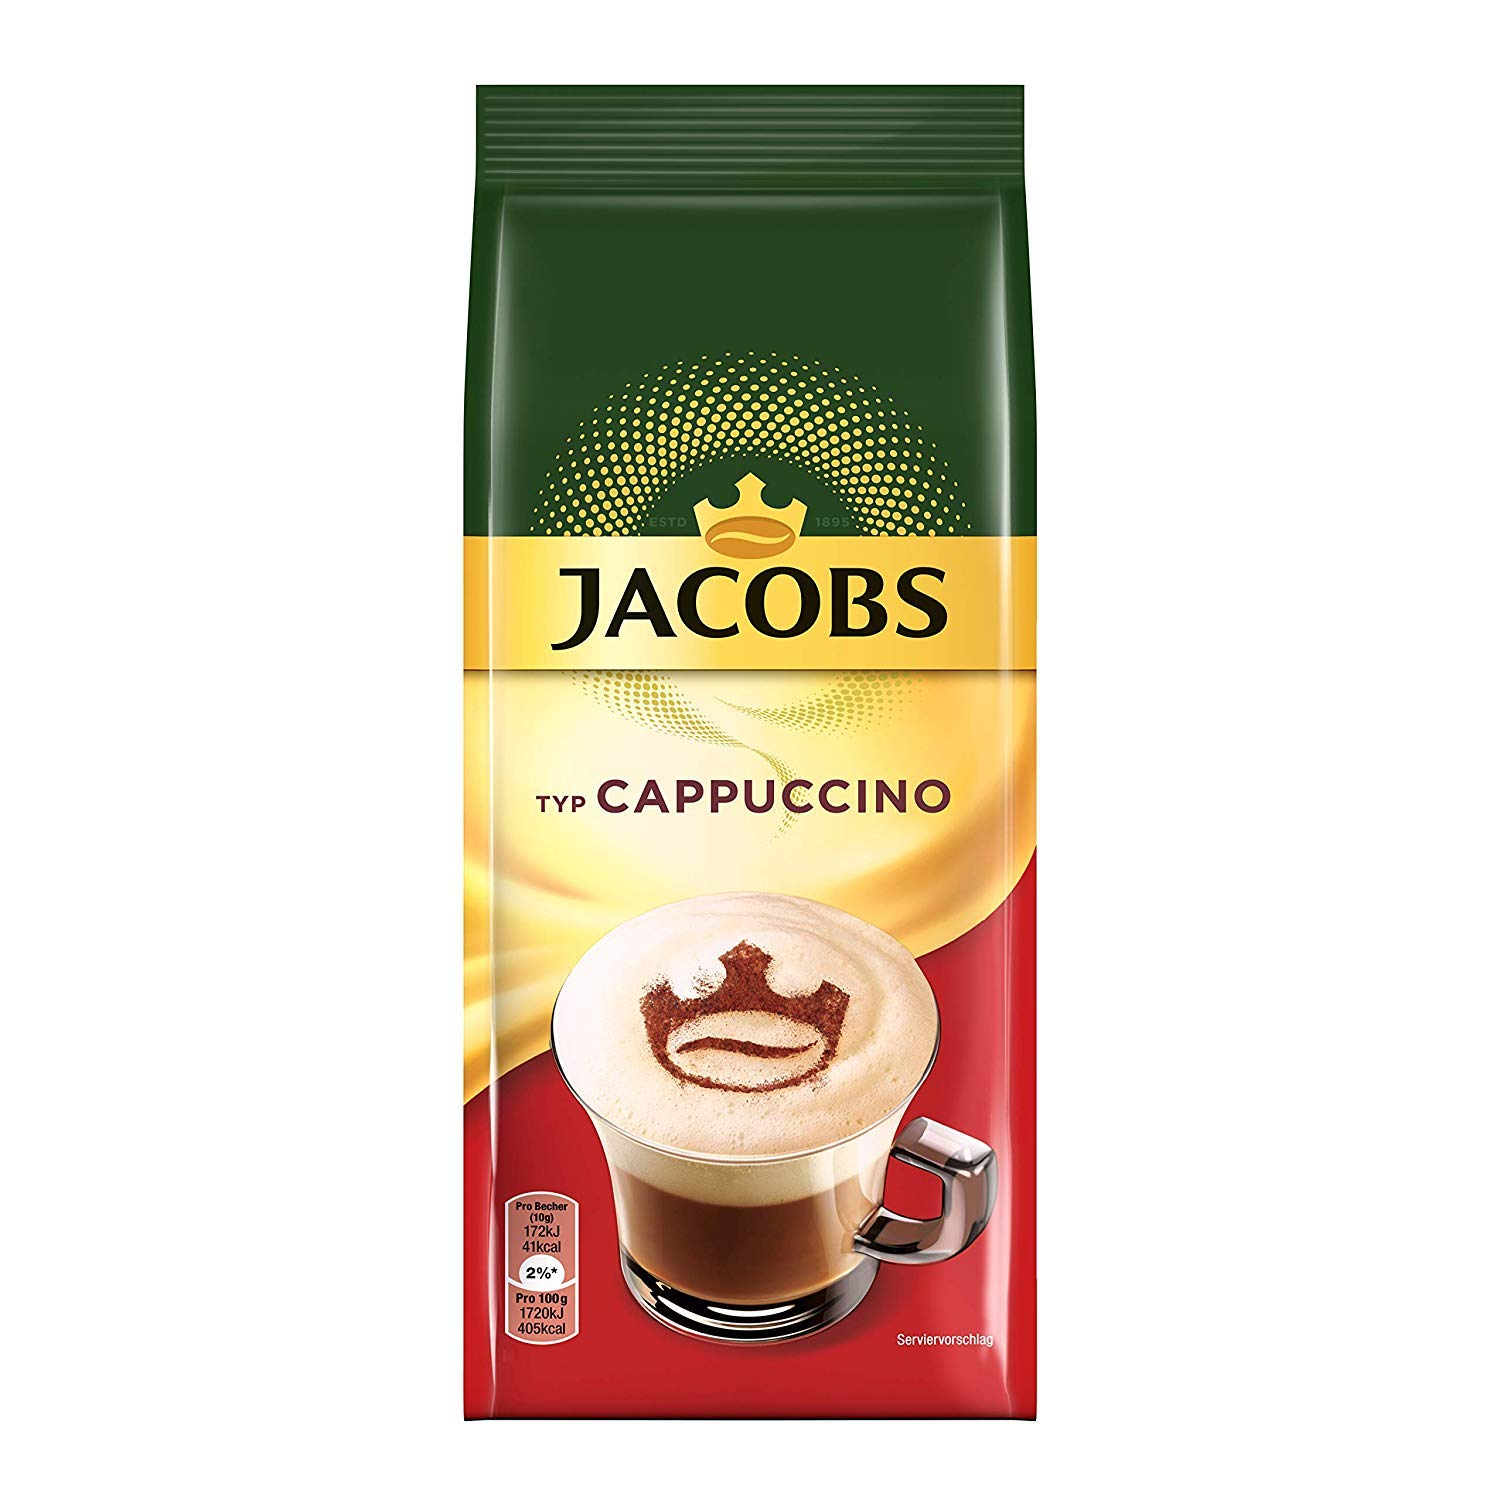 Jacobs Cappuccino Coffee Specialty 400g Refill Bag